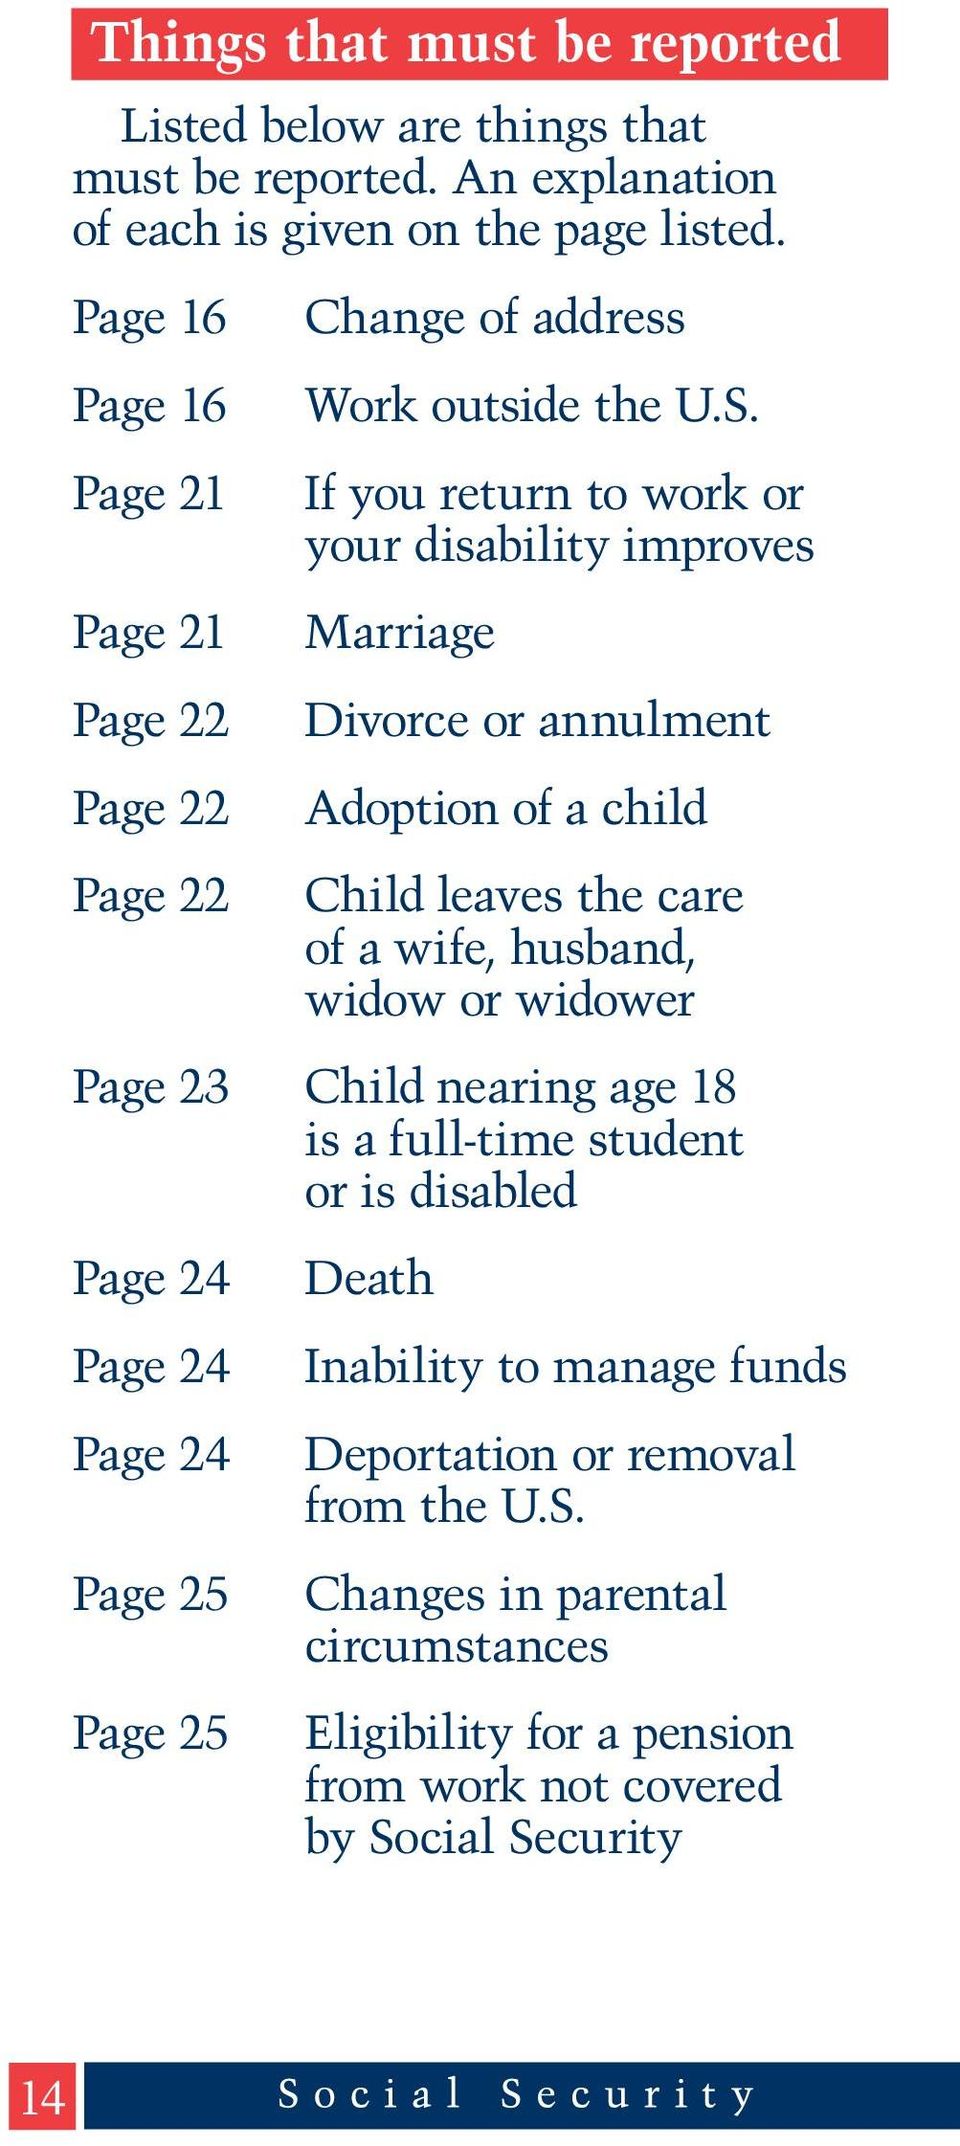 If you return to work or your disability improves Marriage Divorce or annulment Adoption of a child Child leaves the care of a wife, husband, widow or widower Page